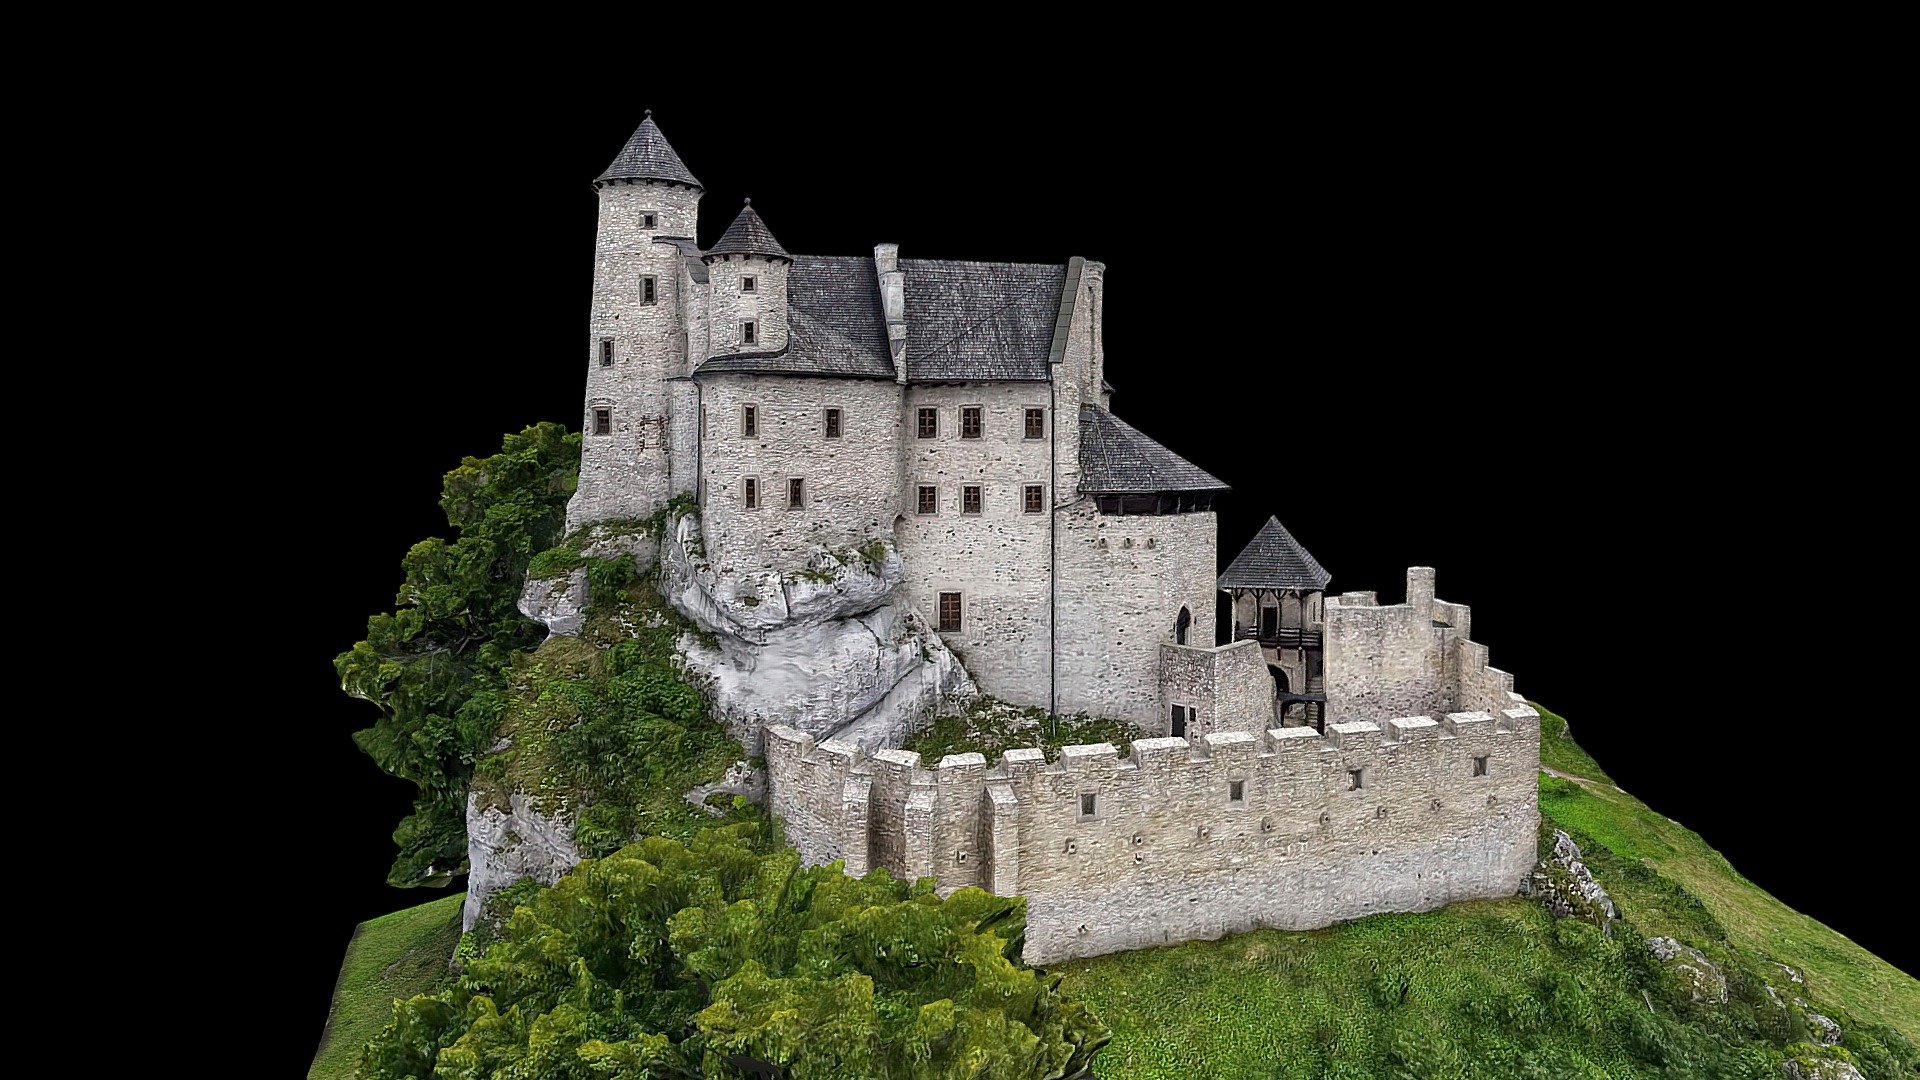 The castle in Bobolice was built by King Casimir III the Great in the middle of the 14th century, probably in place of an earlier wooden structure. 
The castle was a part of the defence system of royal strongholds protecting the western border of Poland on the side of Silesia 3d model